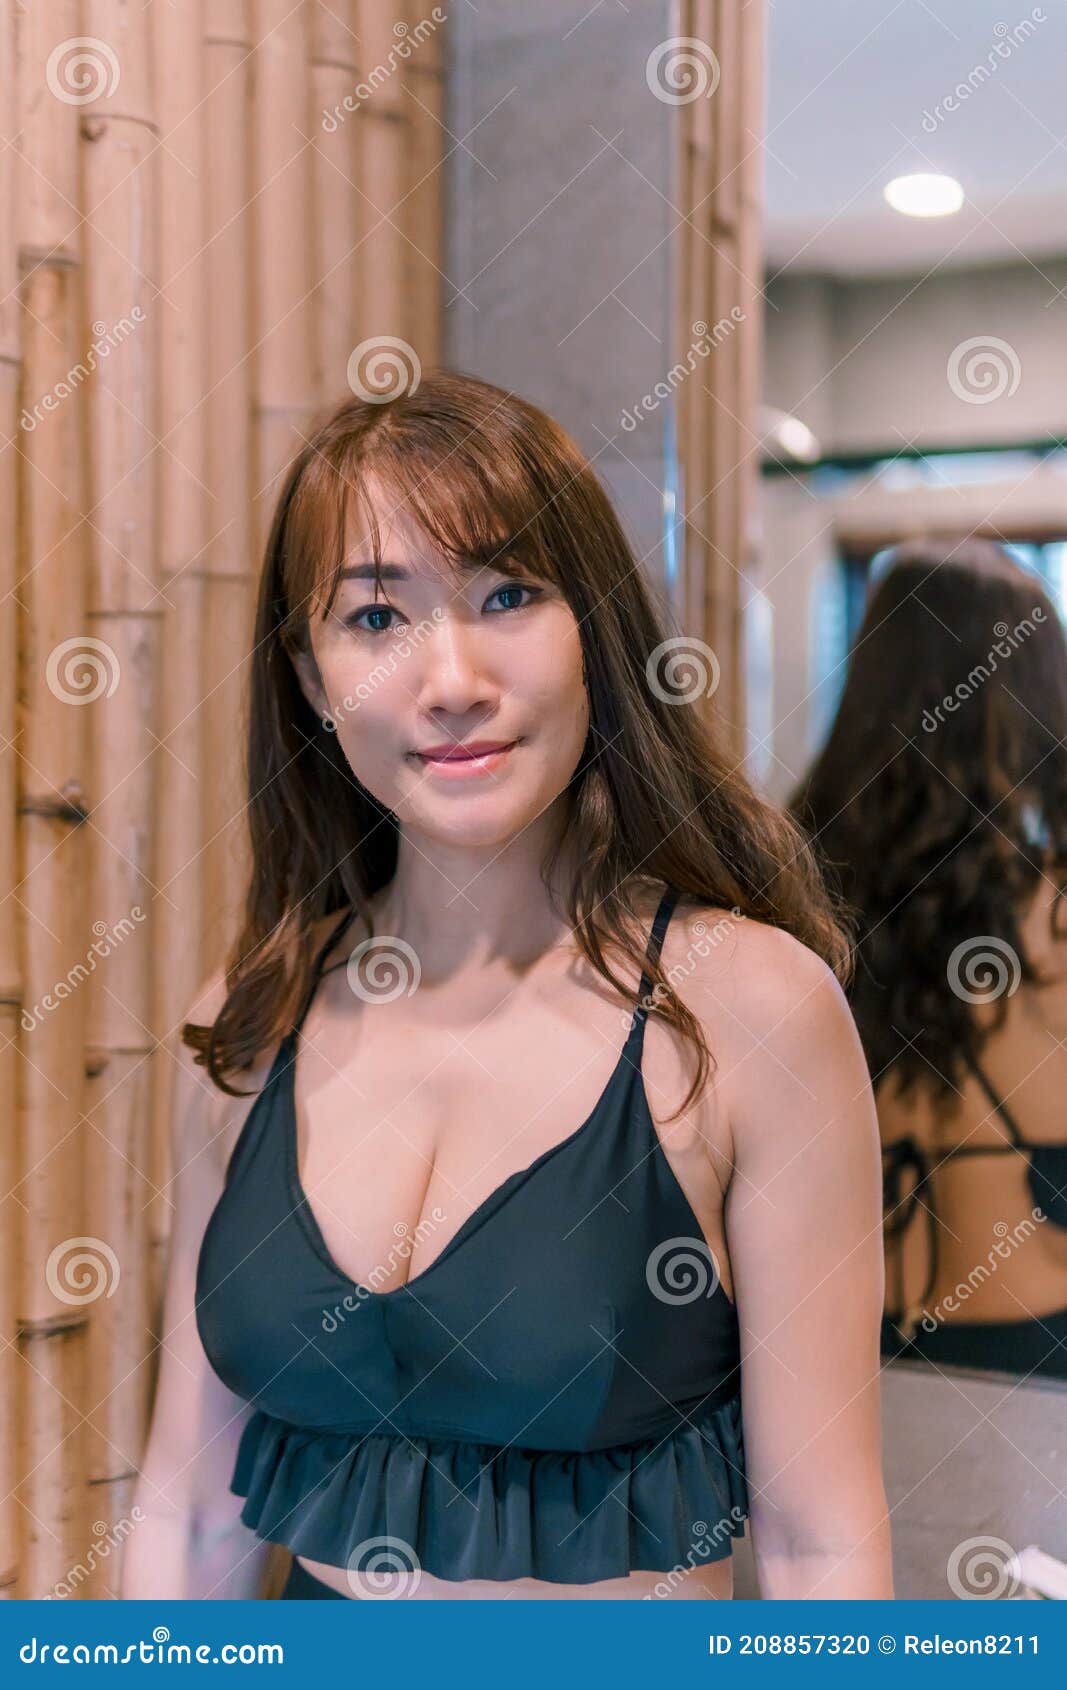 atle egeberg recommends hot looking asian women pic